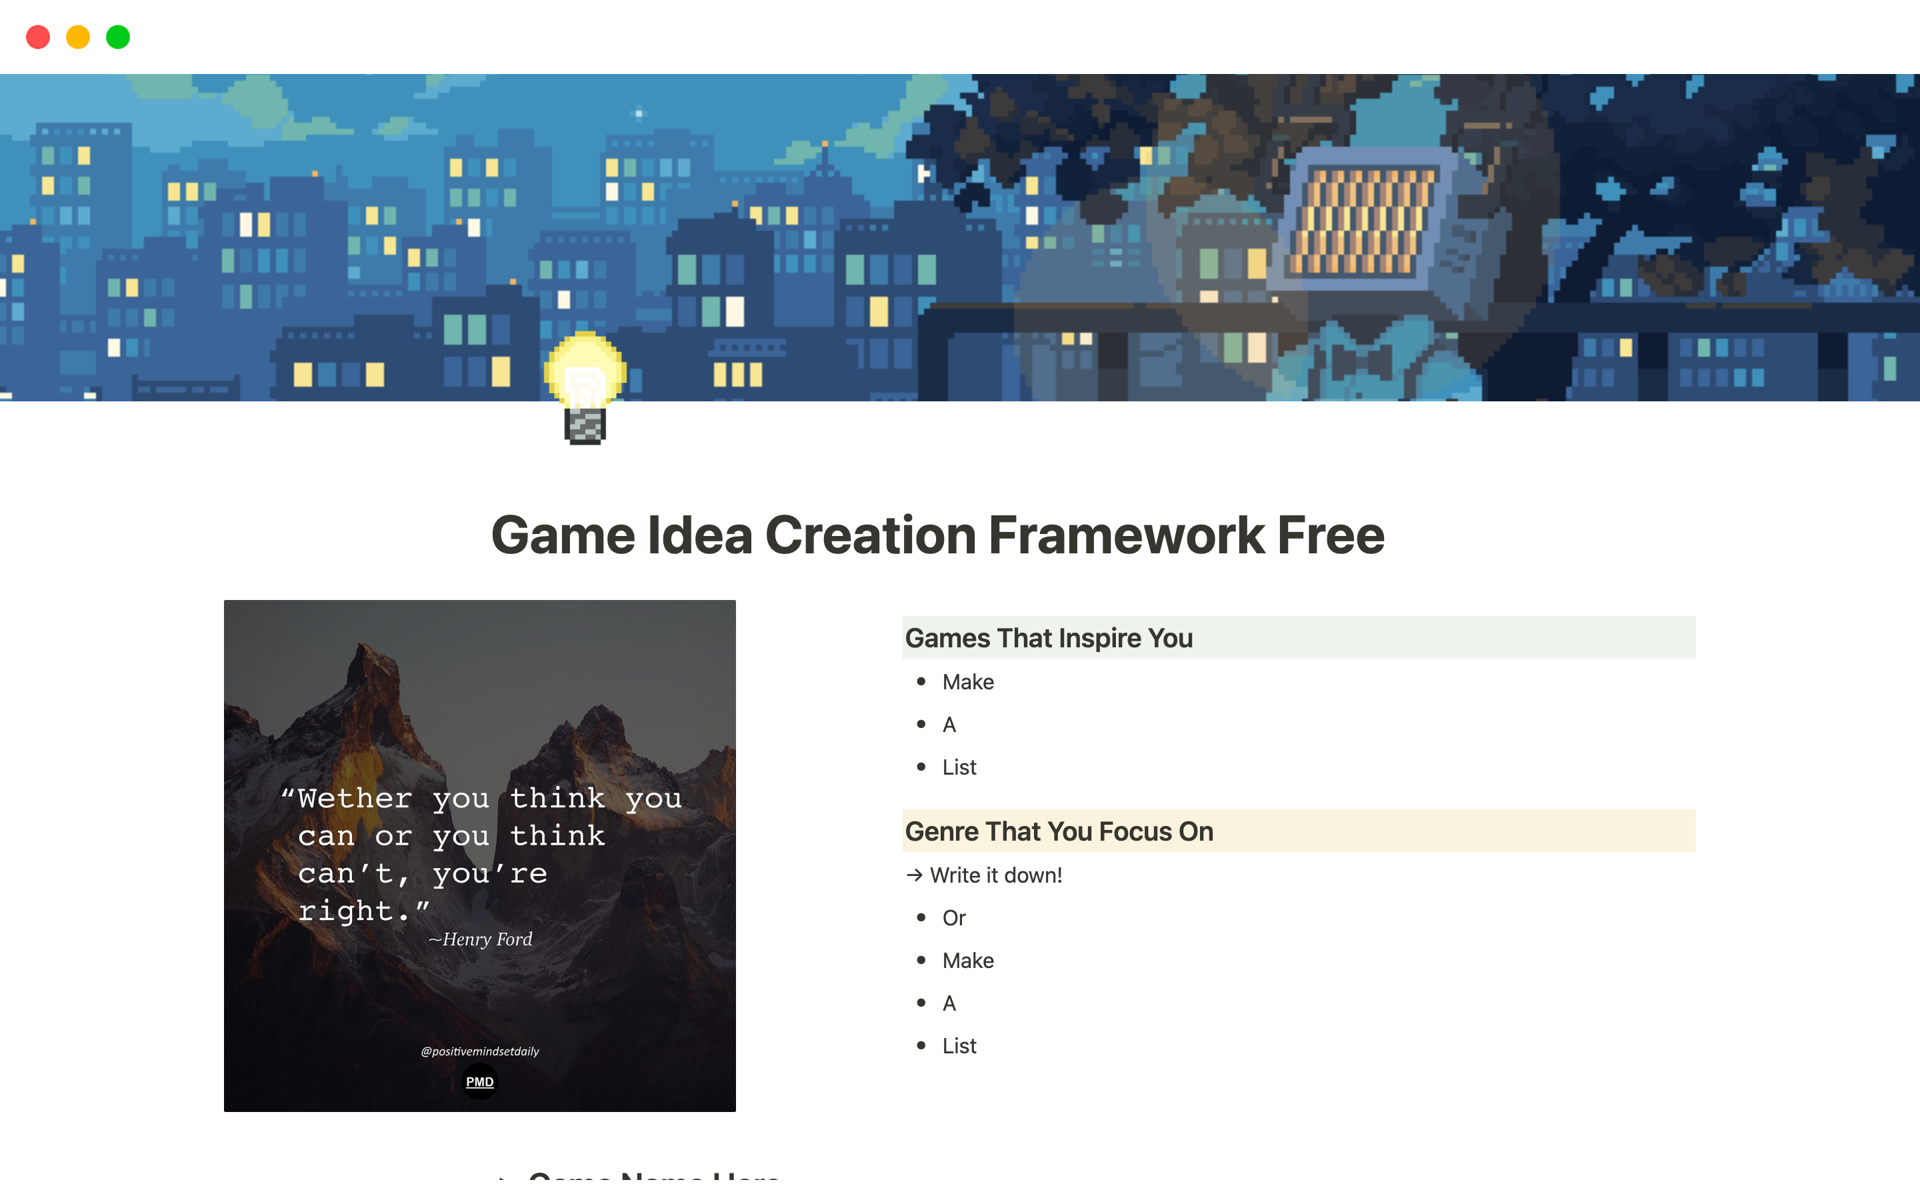 Framework for quickly coming up with game ideas and saving them!